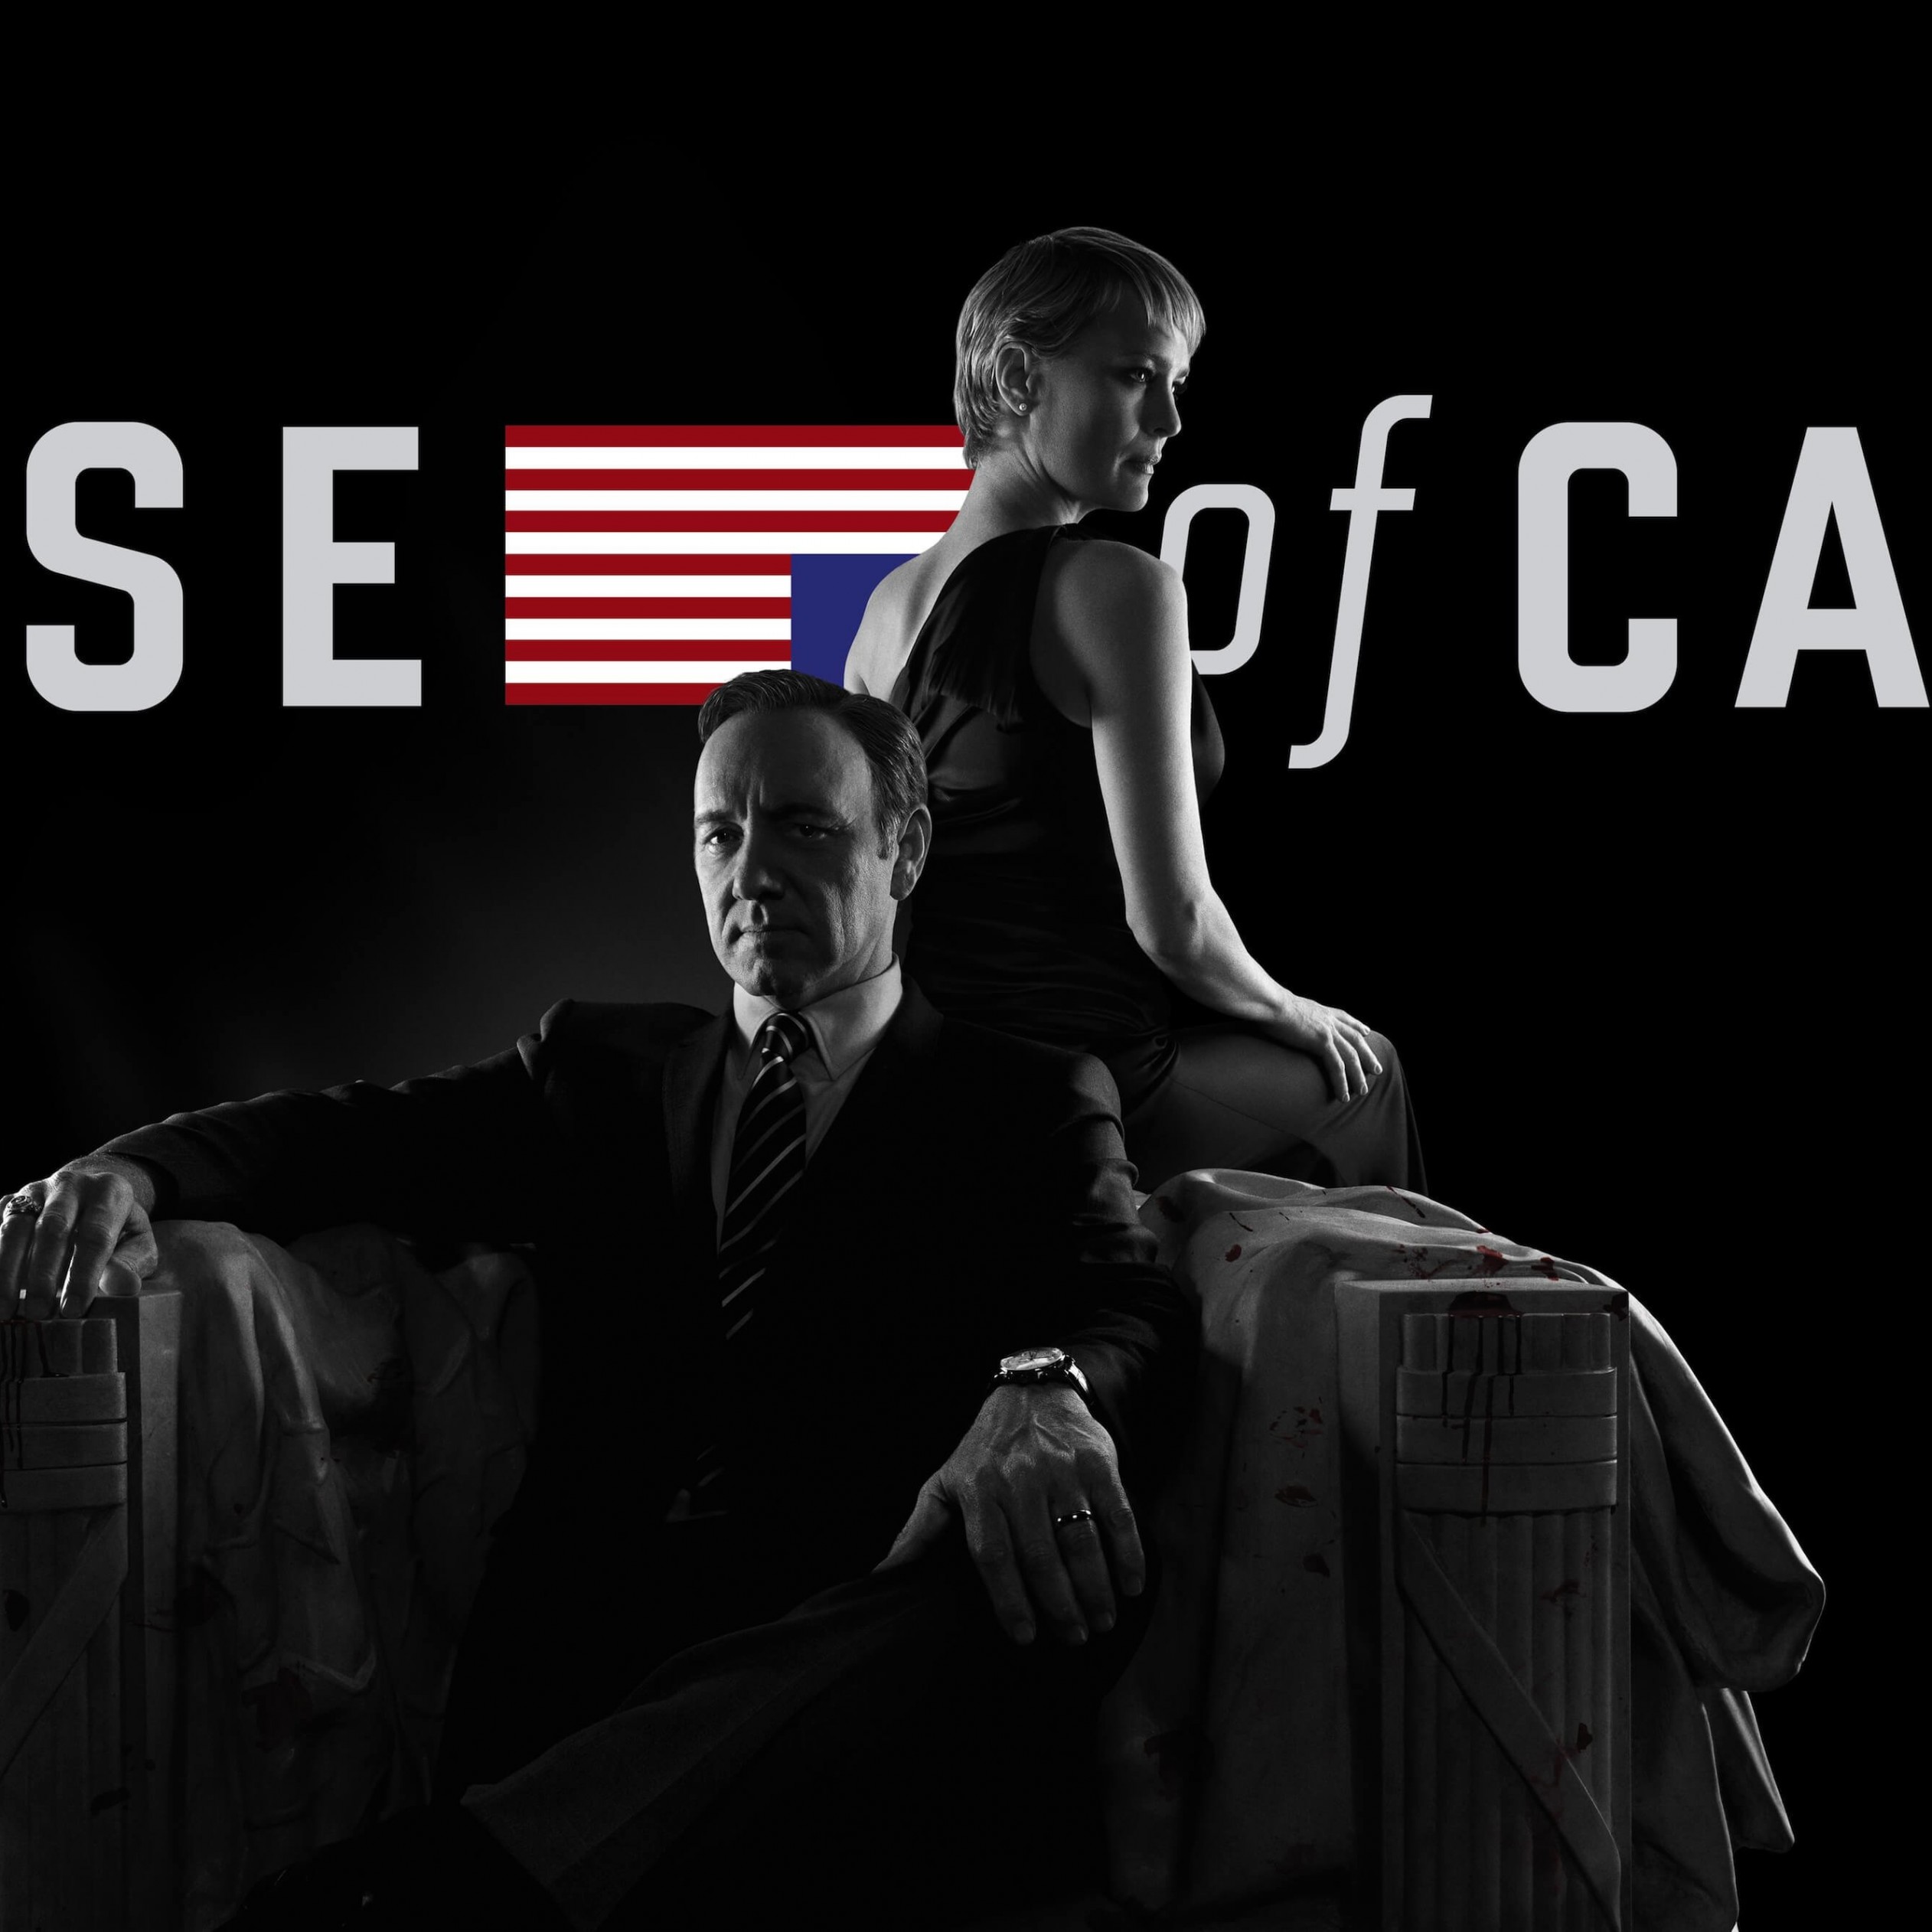 House of Cards - Black & White Wallpaper for Apple iPad 4